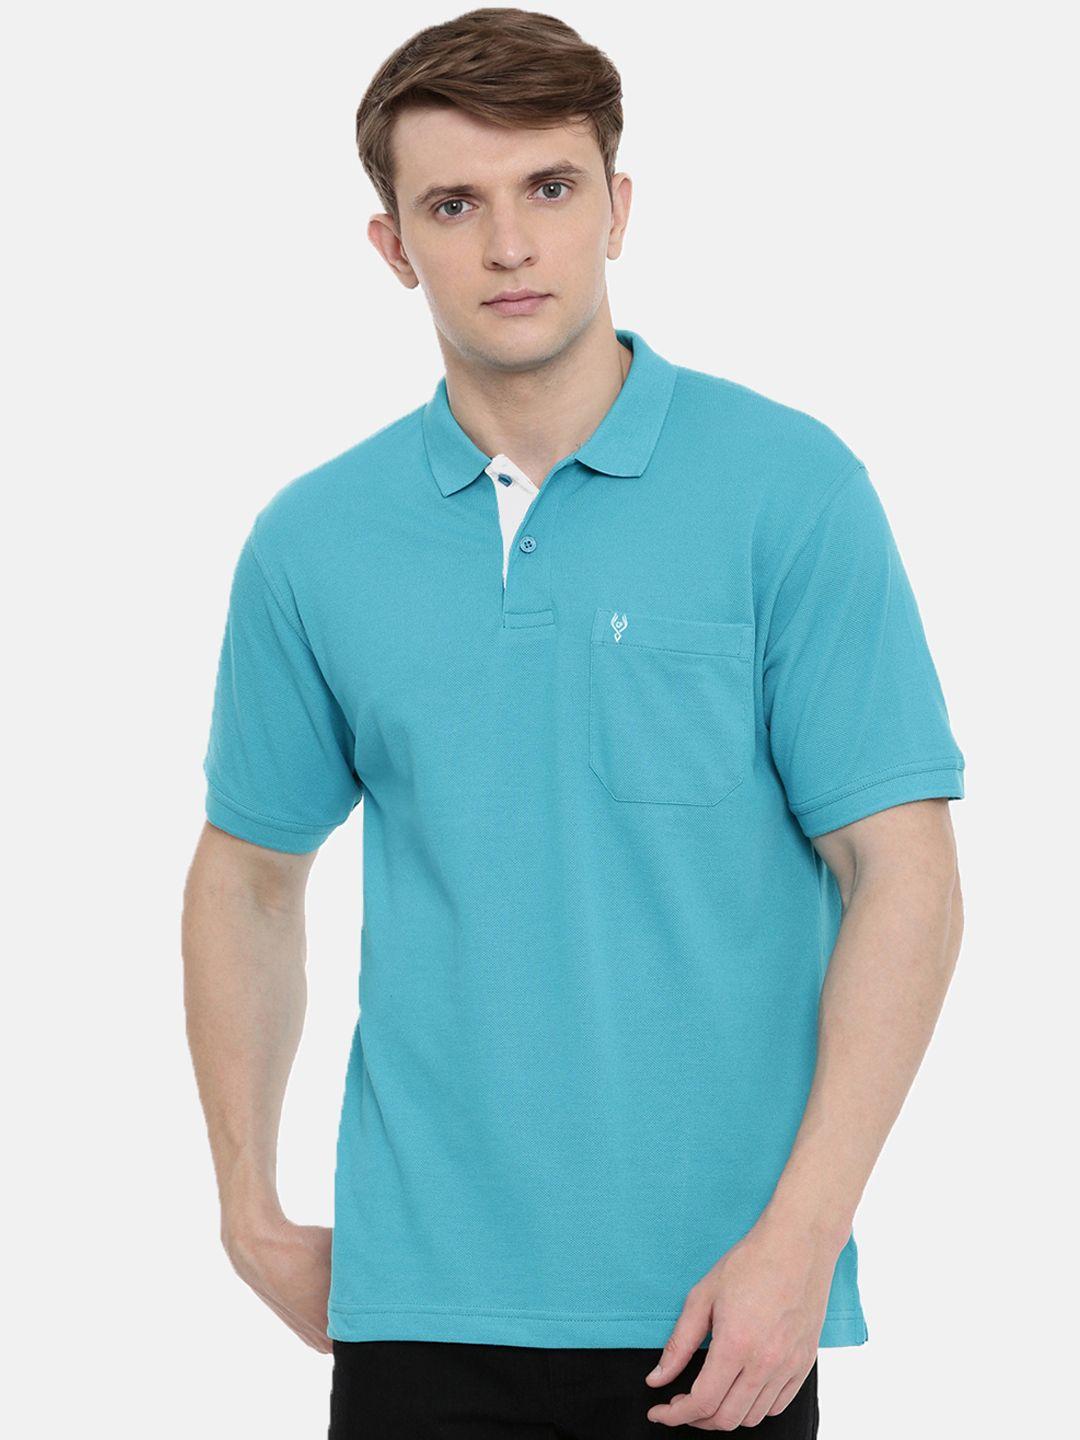 classic polo men turquoise blue solid polo collar t-shirt